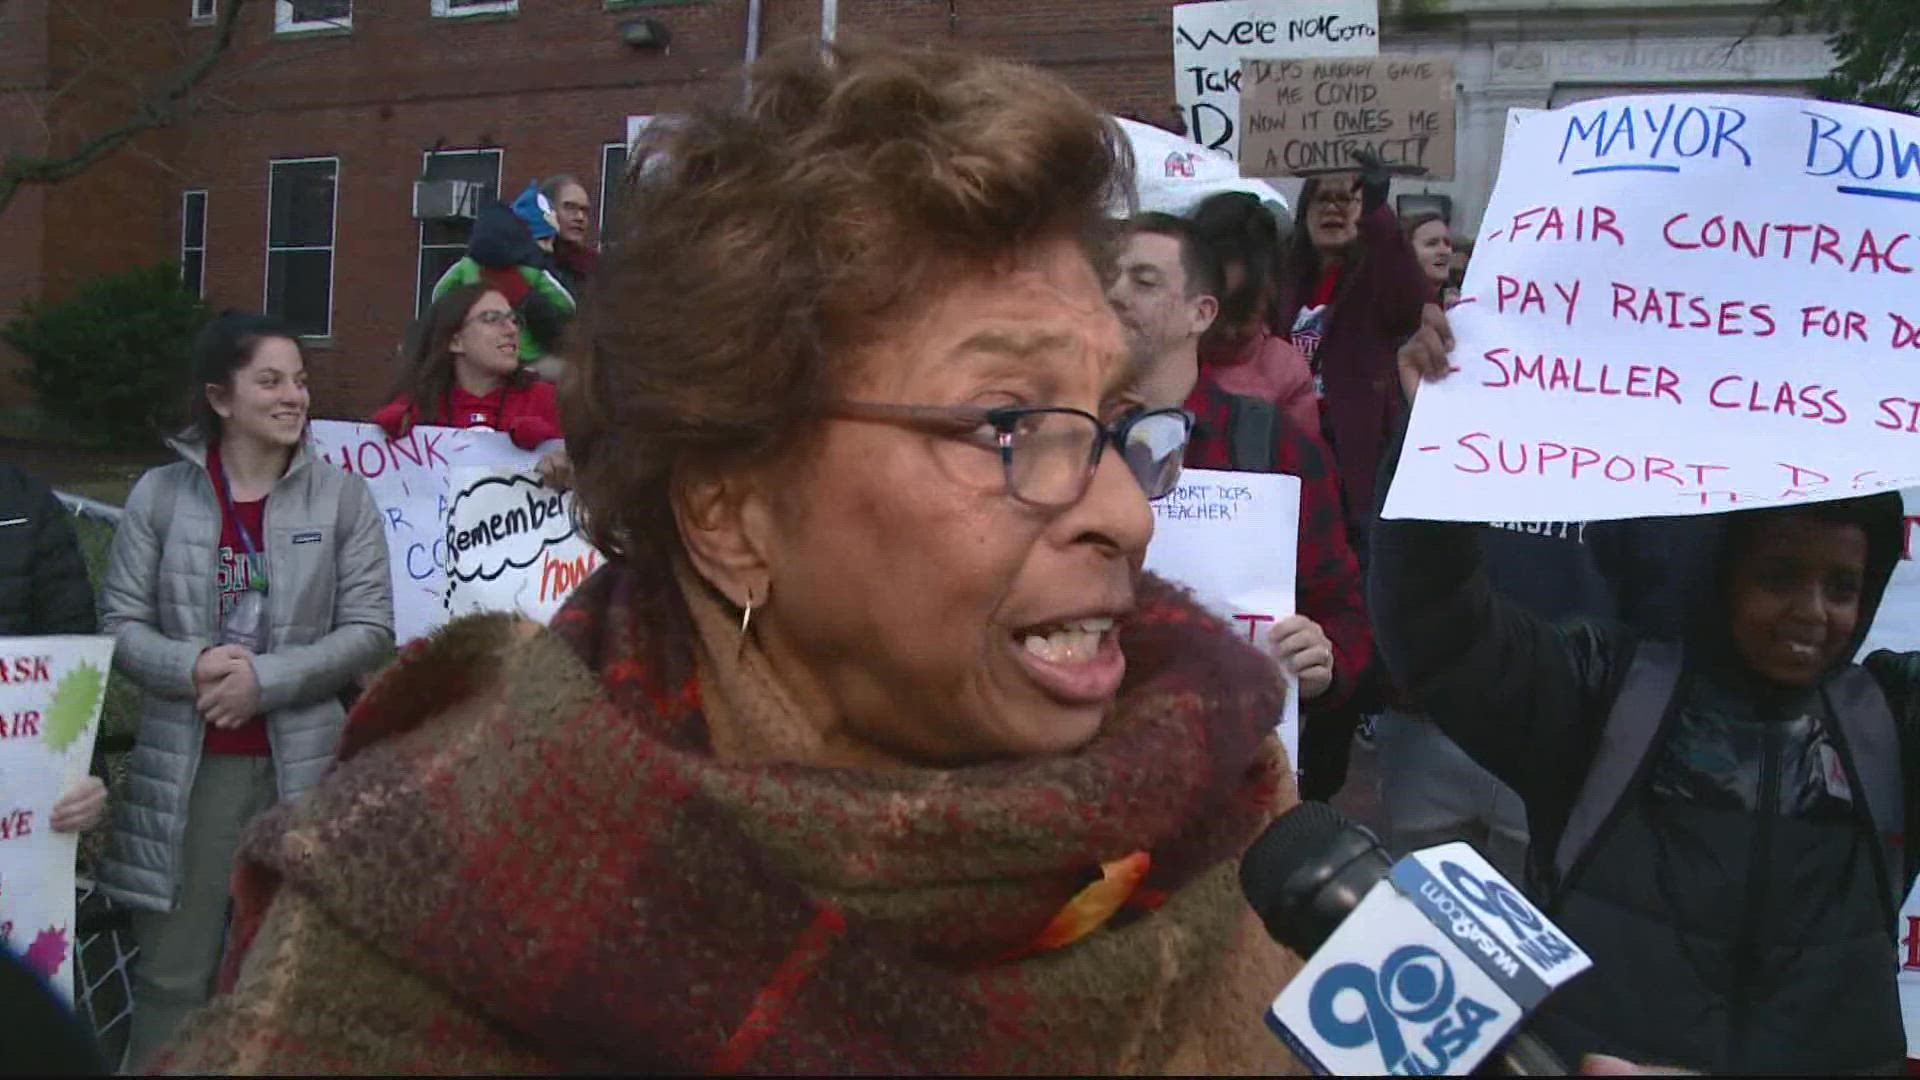 They are demanding fixes to the schools they teach at and a new contract.